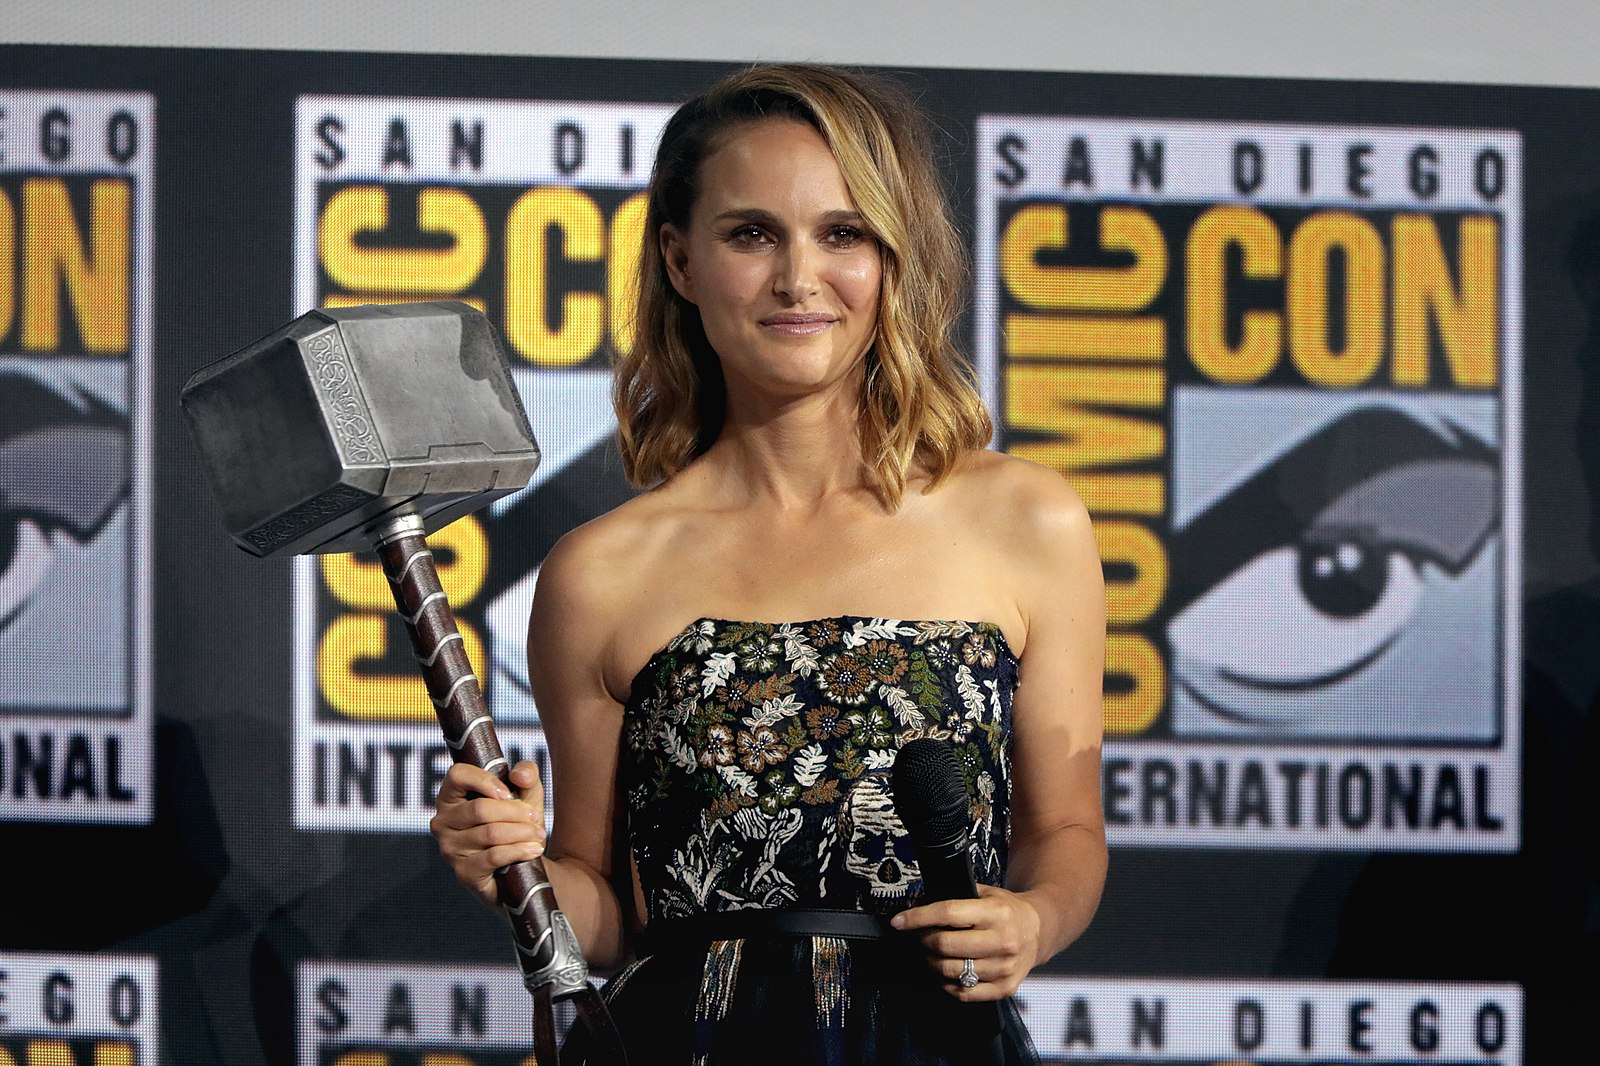 Natalie Portman On Why She Skipped Thor: Ragnarok And Why She’s Back For Love And Thunder